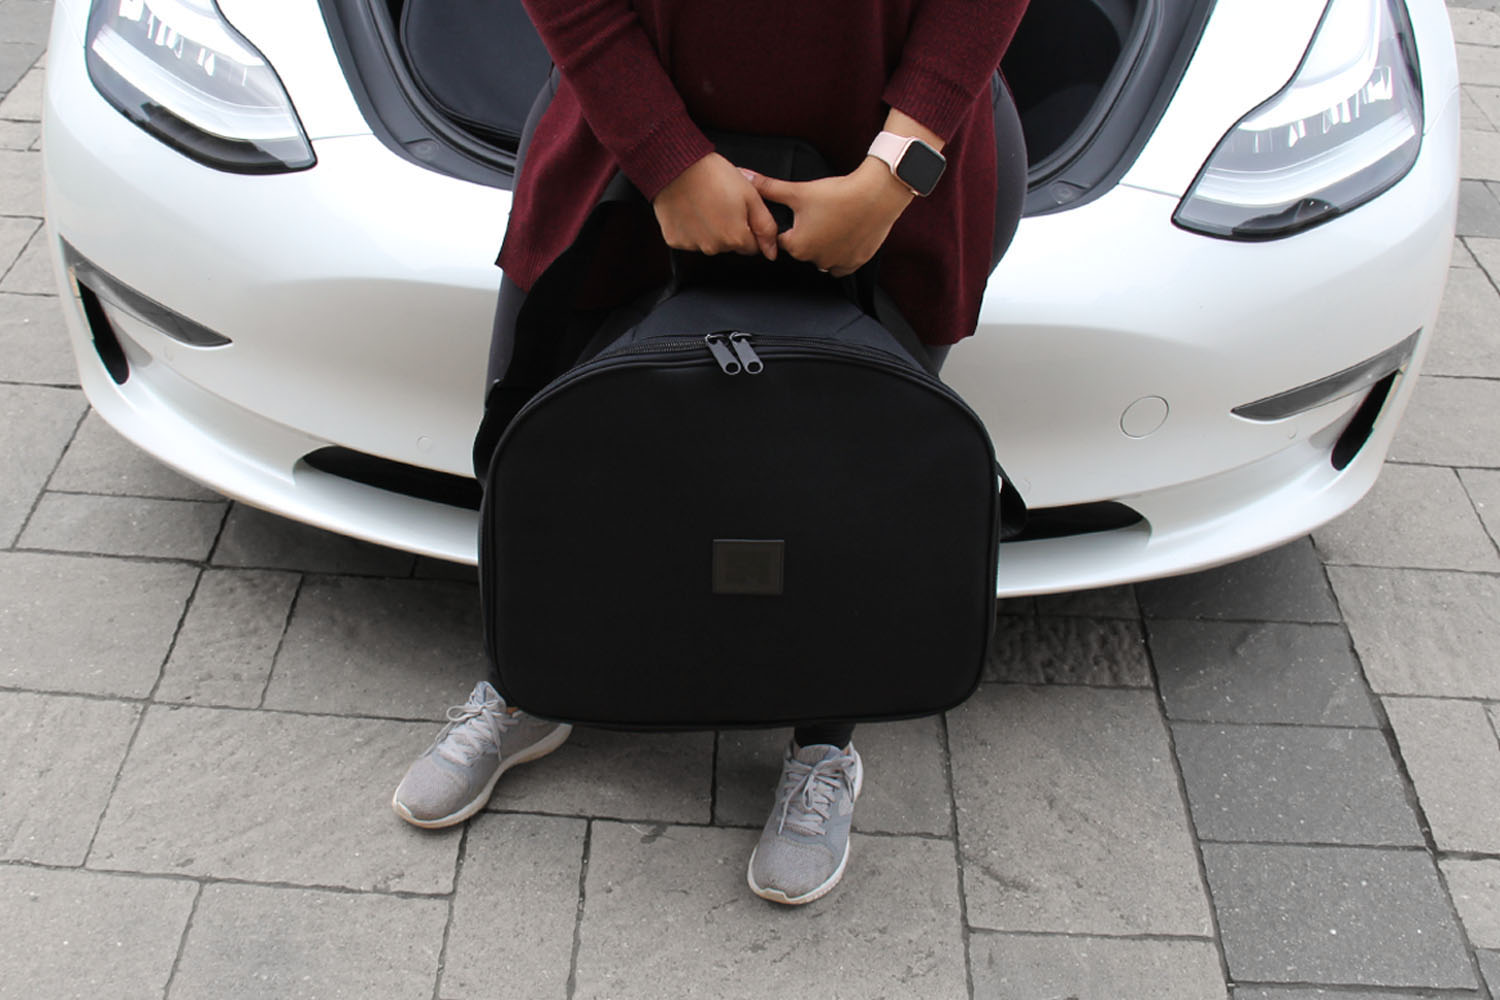 Model 3 luggage bag easy to carry